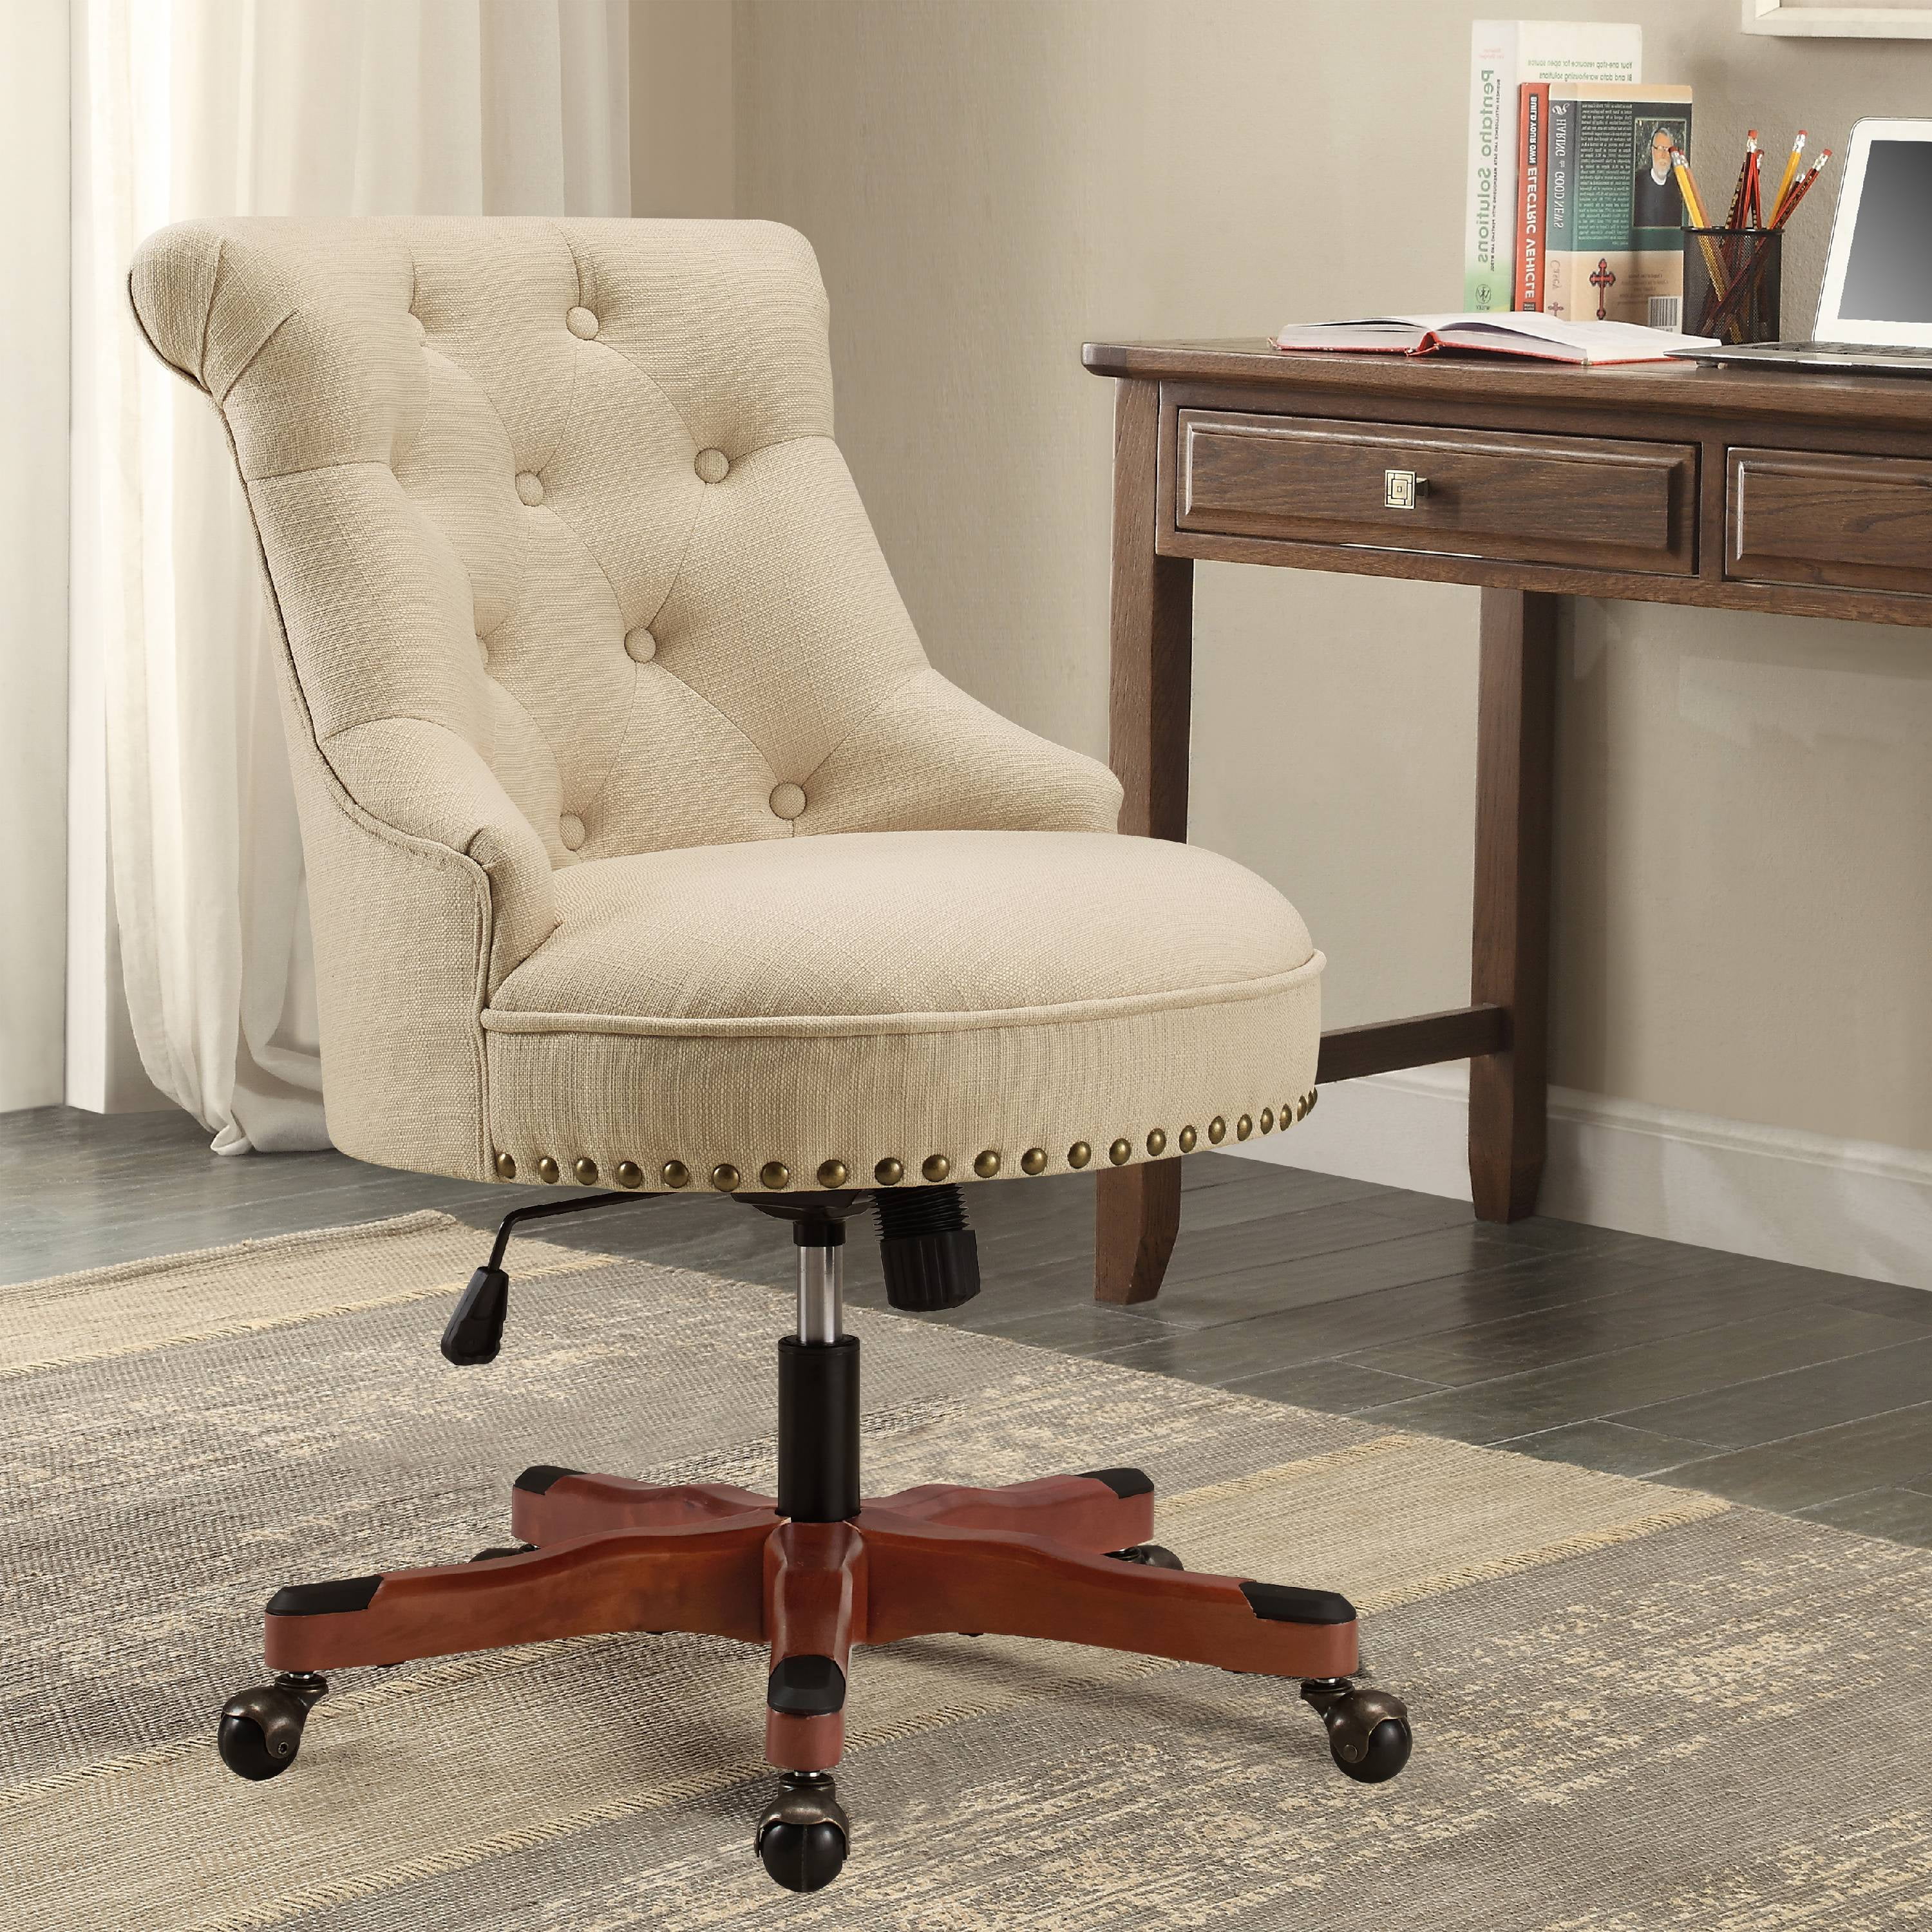 Executive Office Chair Upholstered Armless Wood Base Wheels Desk